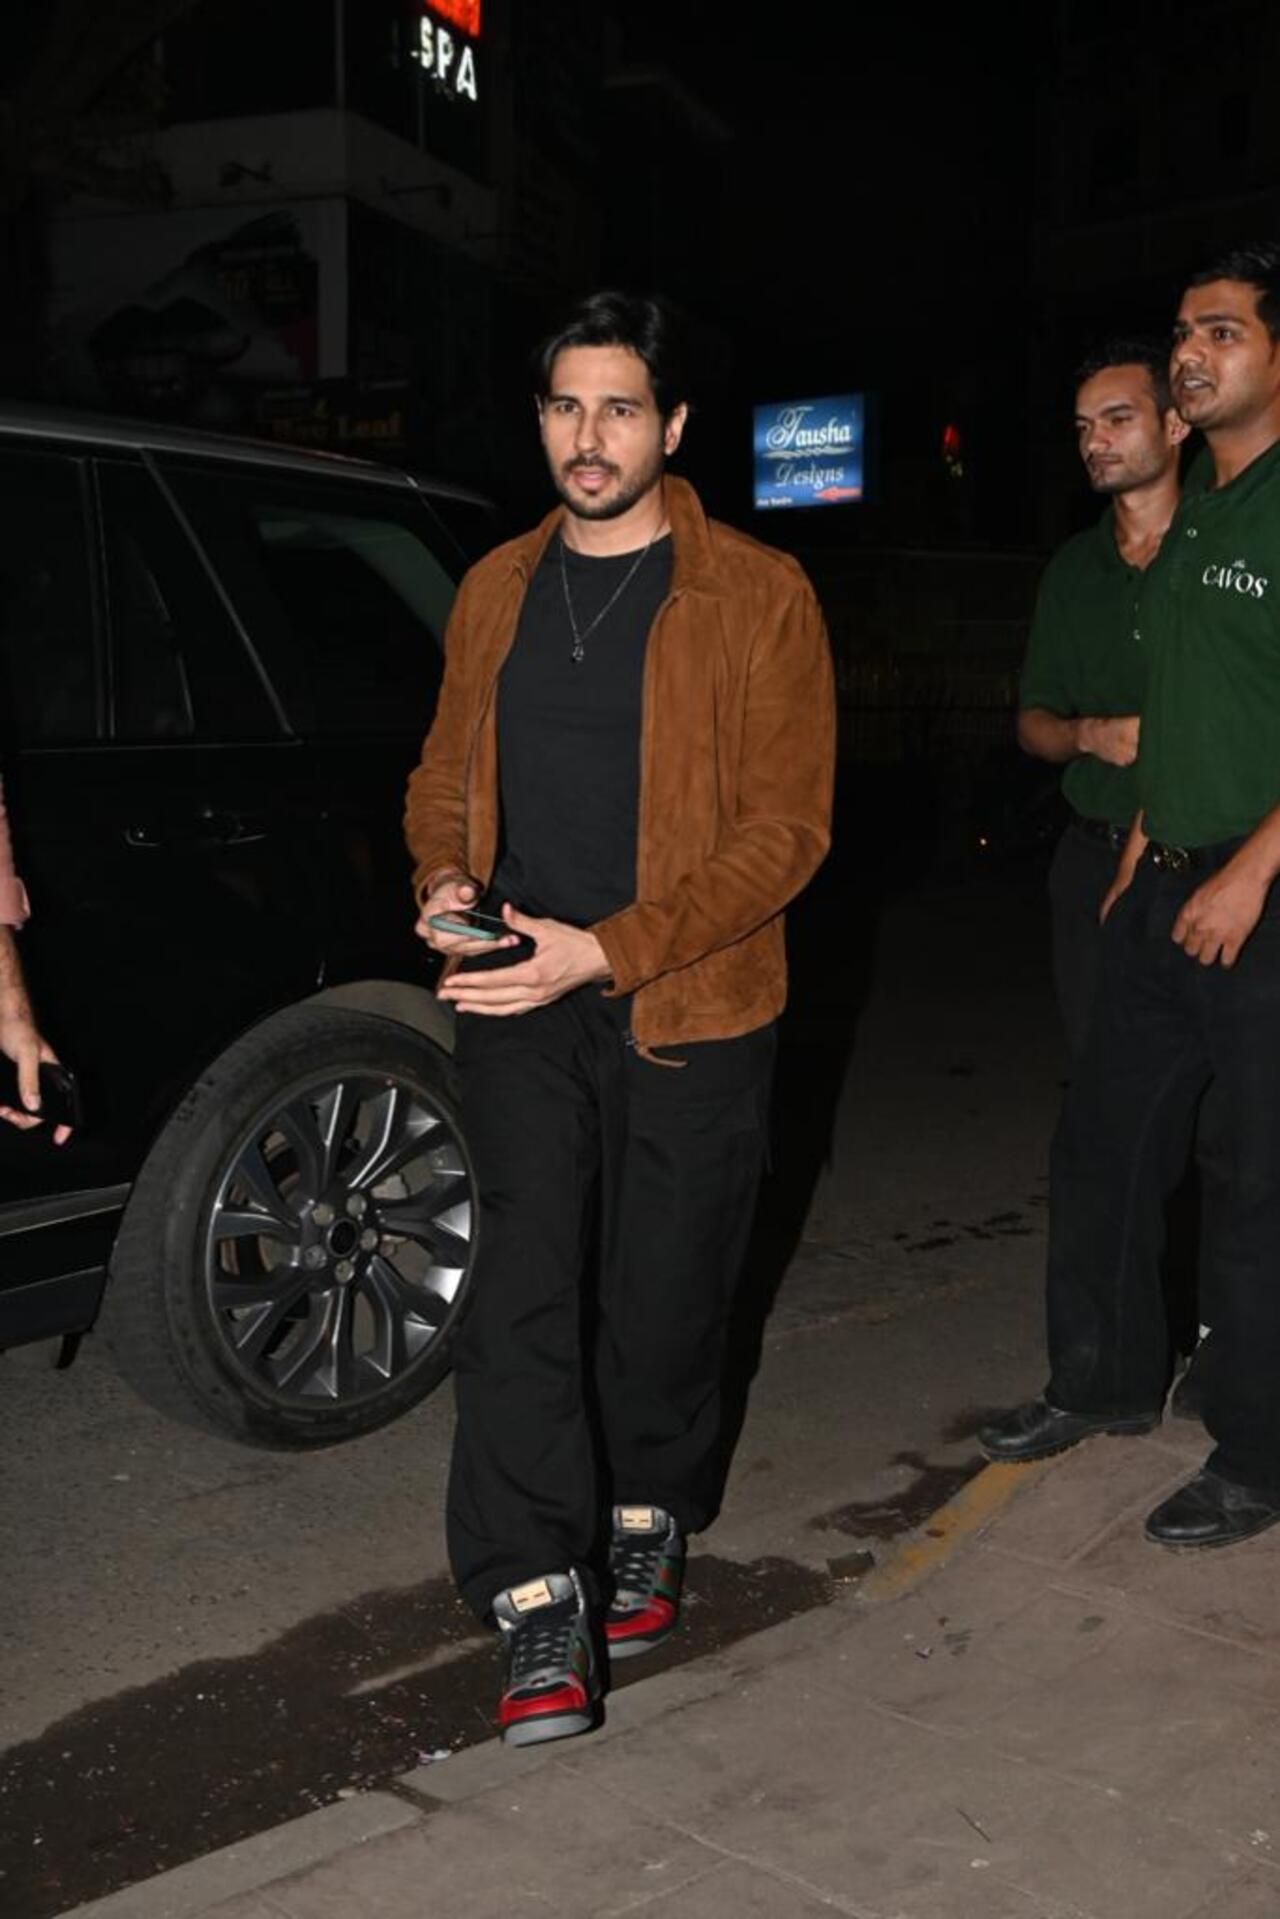 Sidharth Malhotra kept it casual in all-black look with a brown jacket